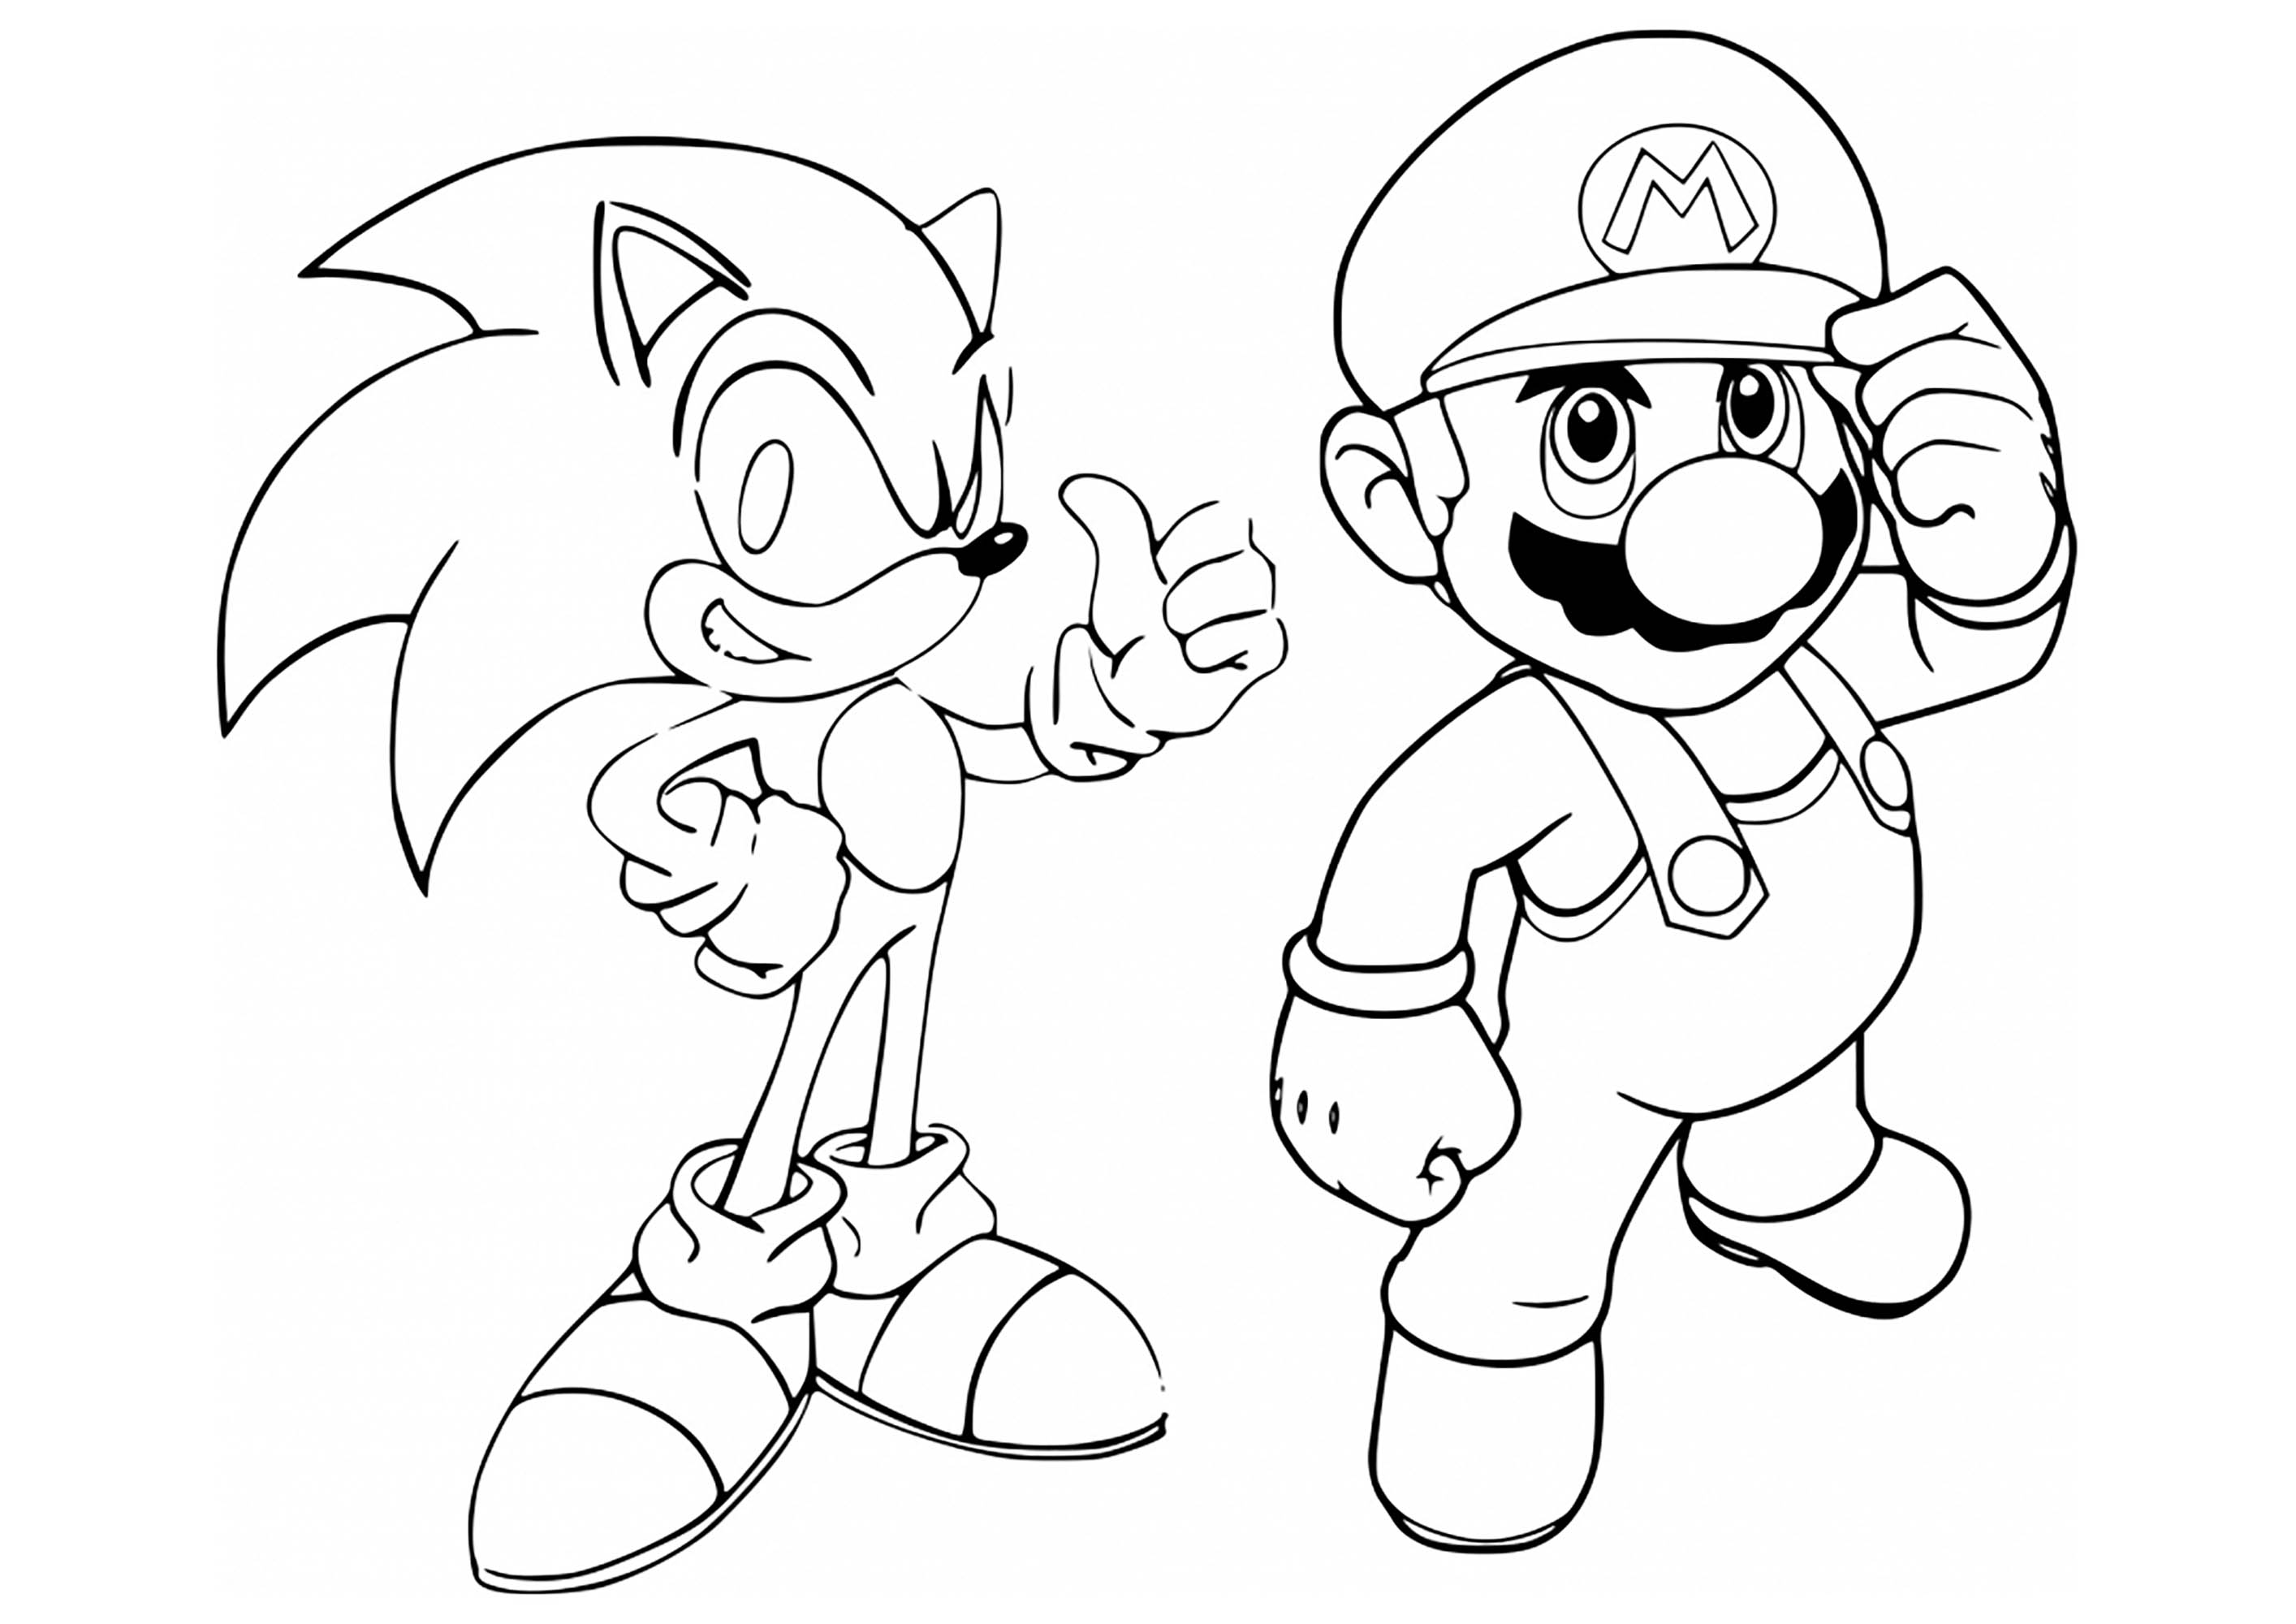 Print Sonic Tails Miles Prower coloring pages  Super mario coloring pages,  Pokemon coloring pages, Mario coloring pages